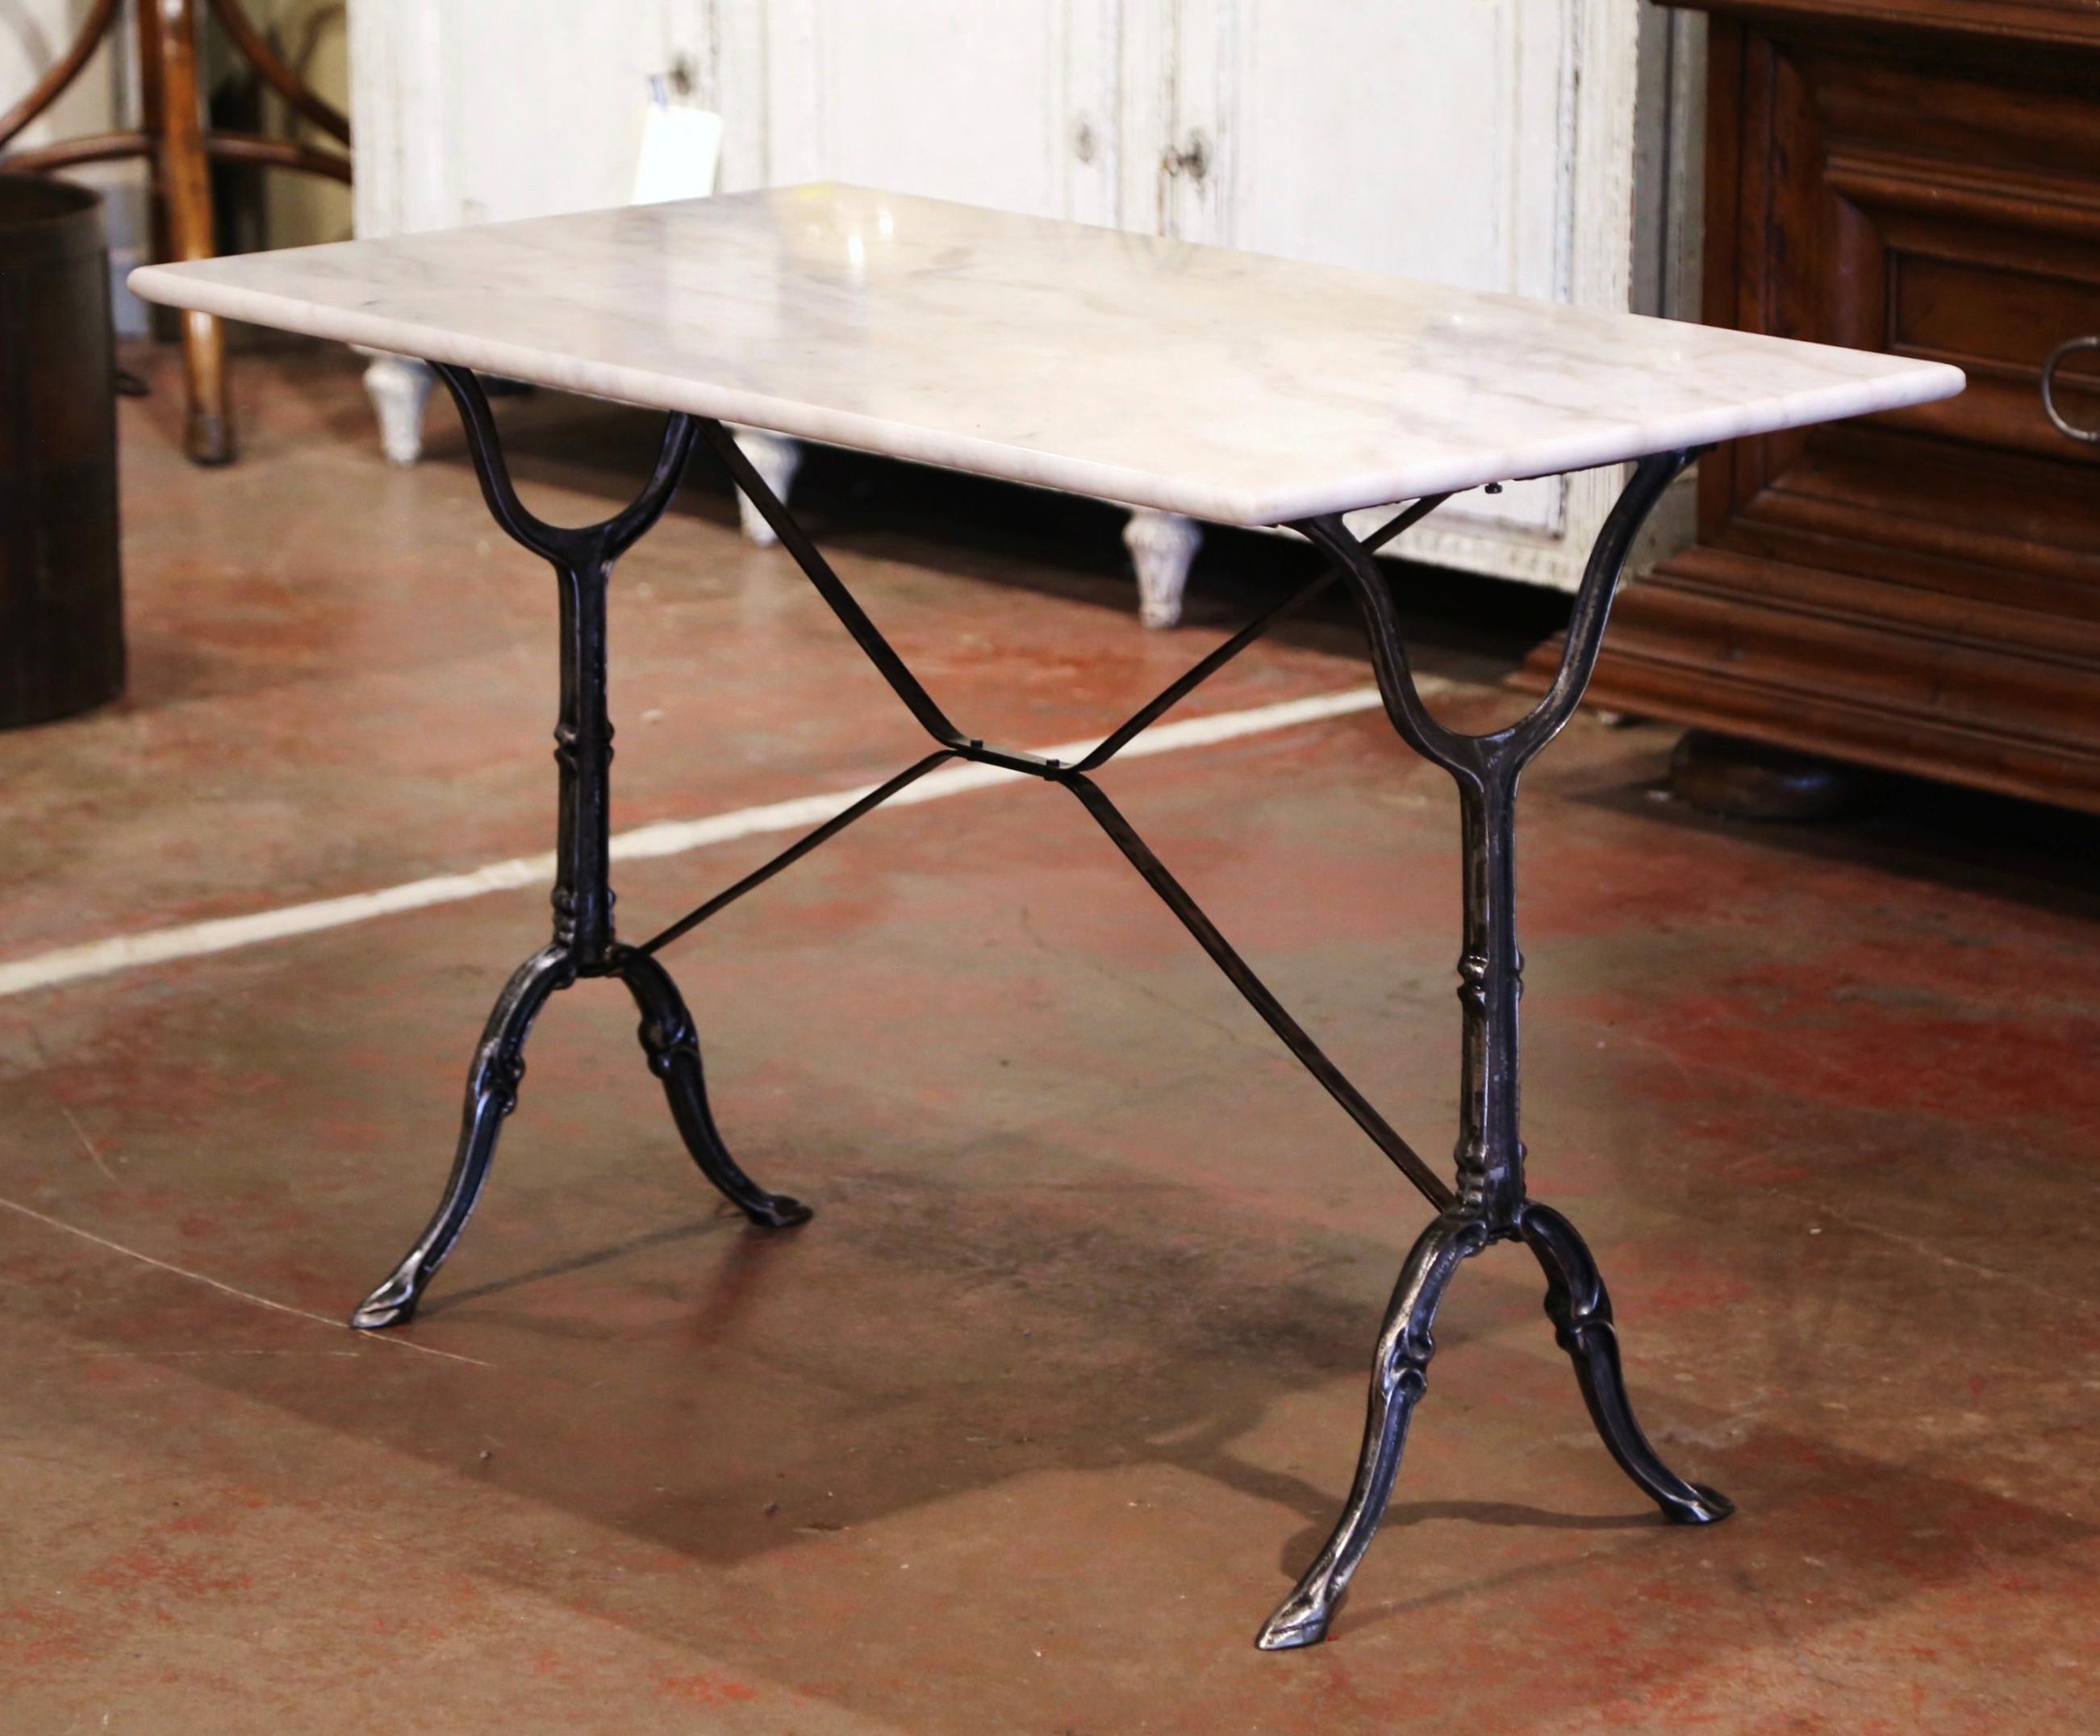 Crafted in France circa 1920, the antique cast iron table sits on a trestle base with elegant scroll legs, joined with a double decorative stretcher. The piece is dressed with the original rectangular white and grey marble top. The classic French